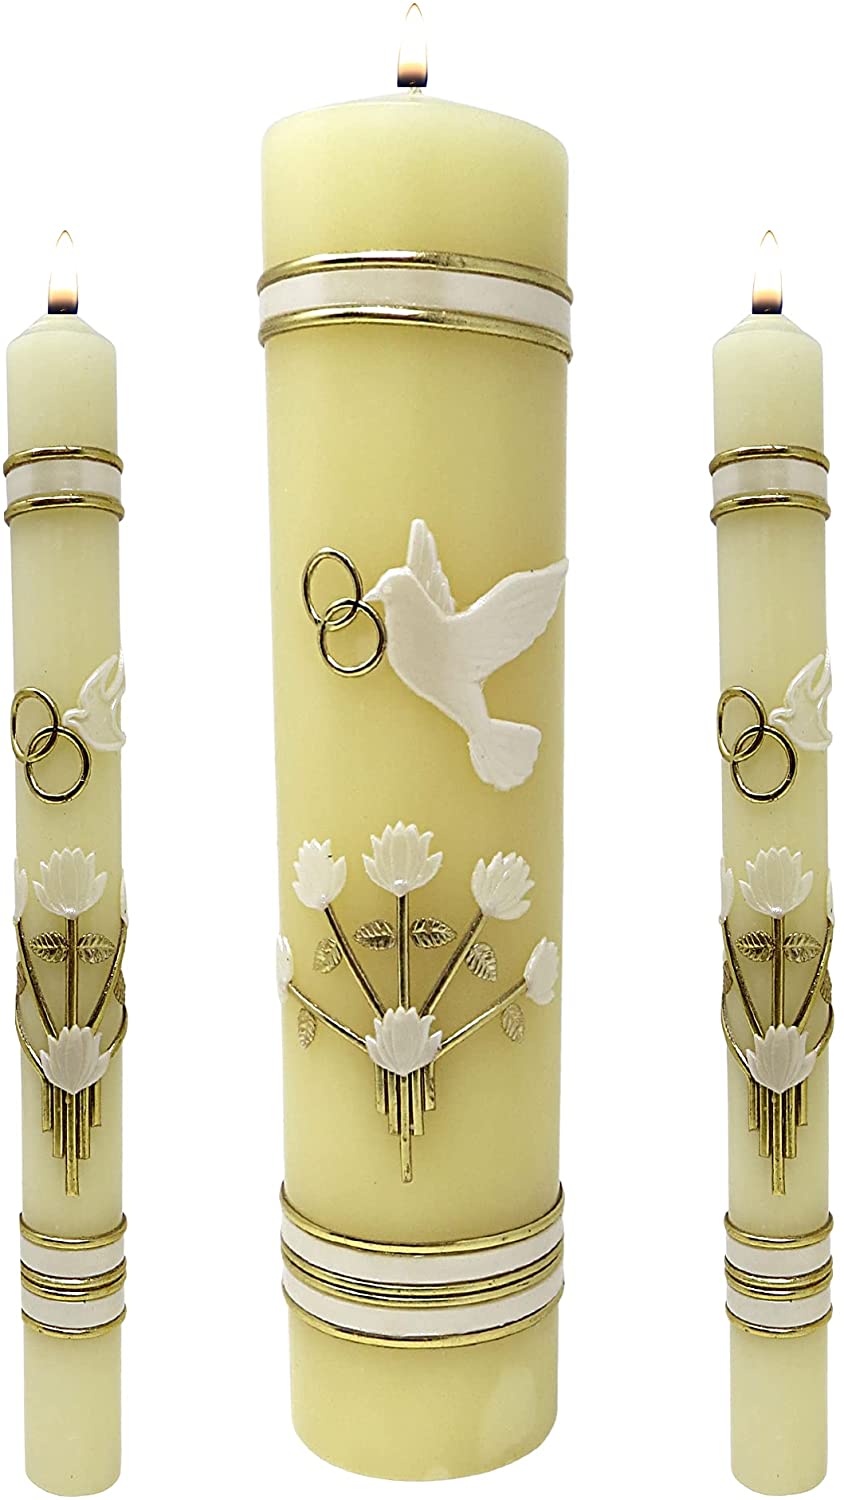 Dove & Ring Wedding Candle